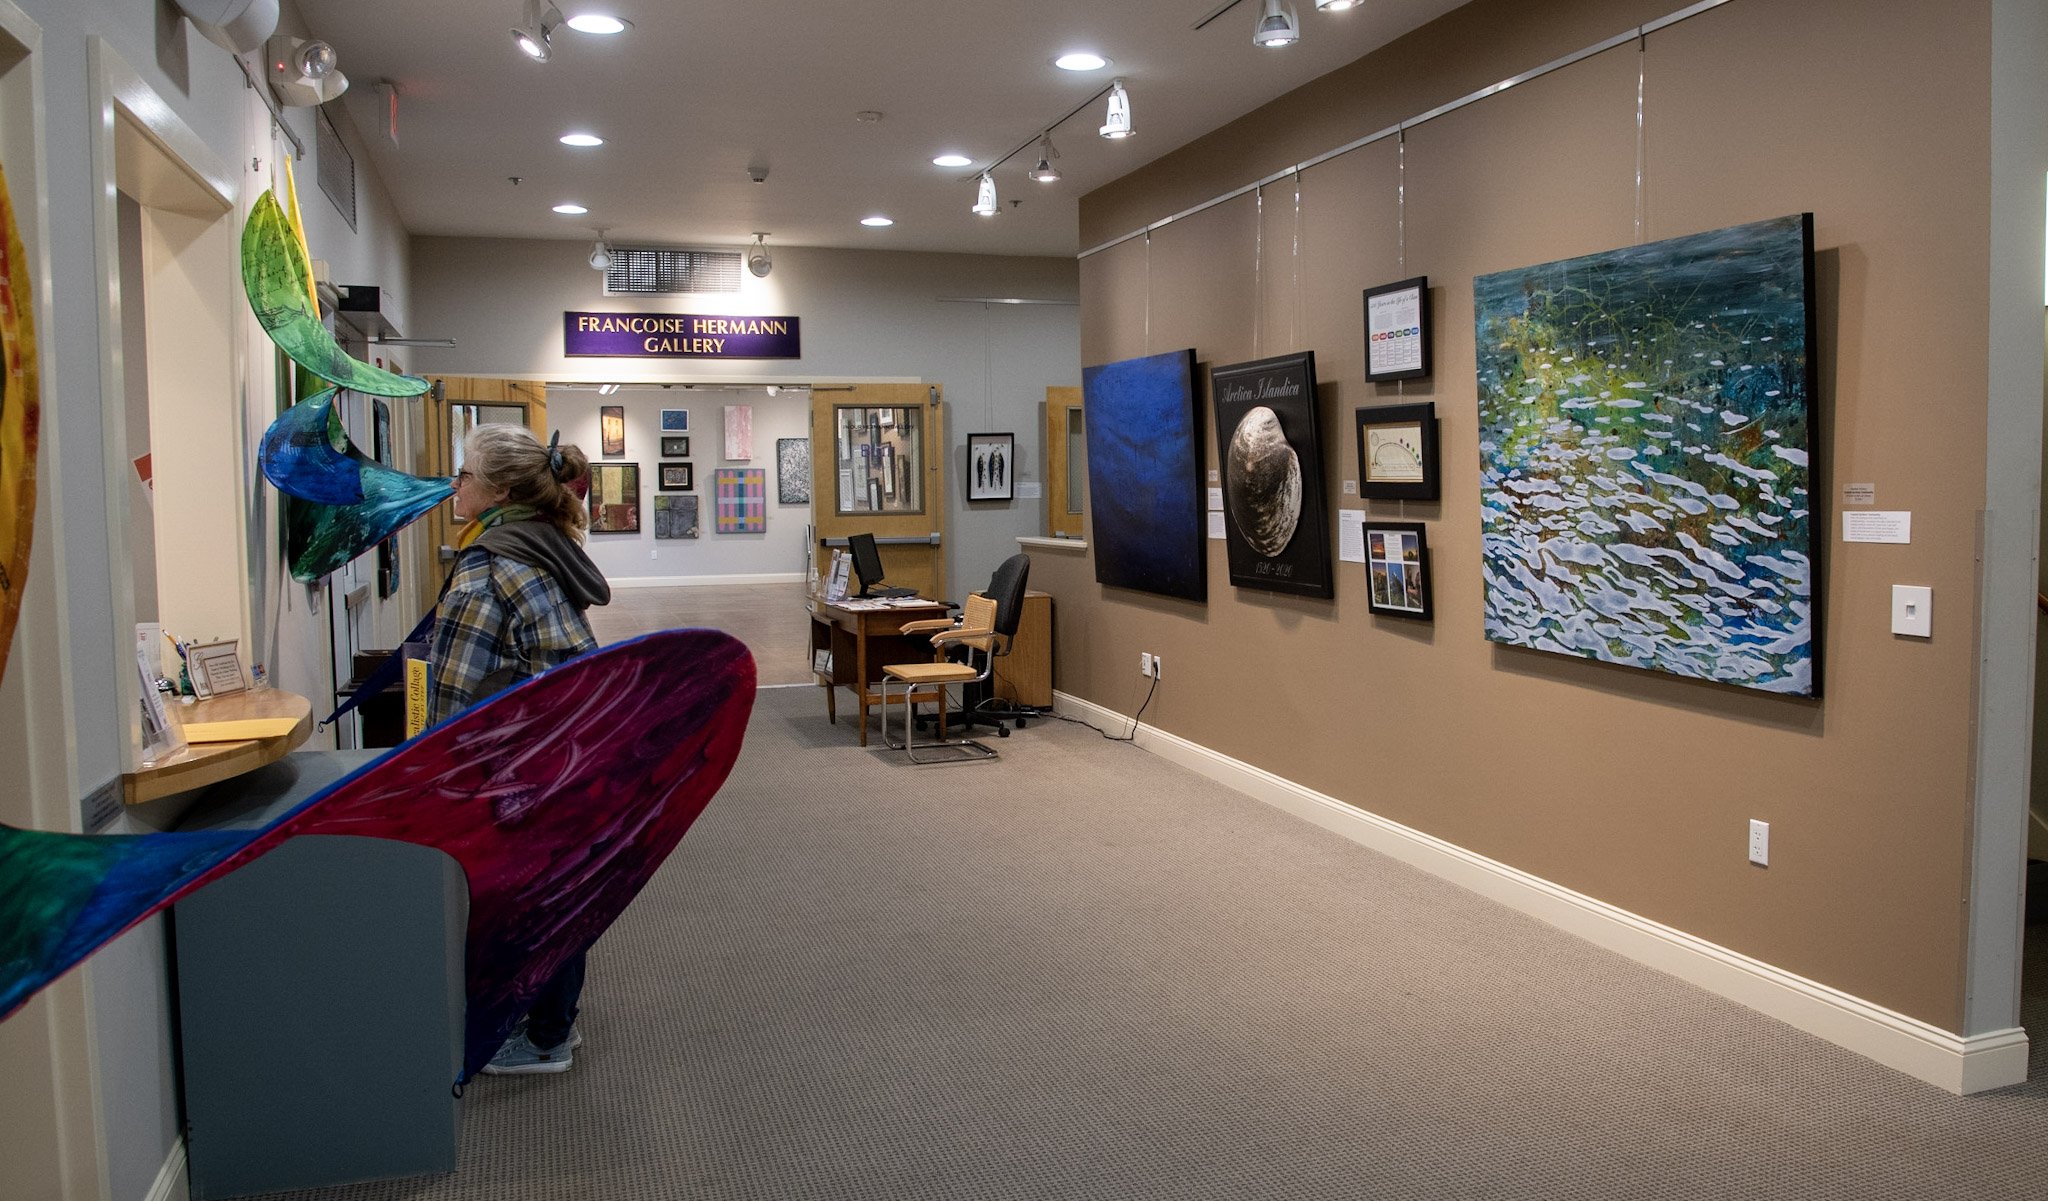  Several works hung in the gallery, including "Marine Heatwaves" by Deb Ehrens, "Deep Ocean: Disintegration" by Heather E. Stivison, "Arctica Islandica" by Claire Marschak, and "Coastal Surface: Community" by Heather E. Stivison 